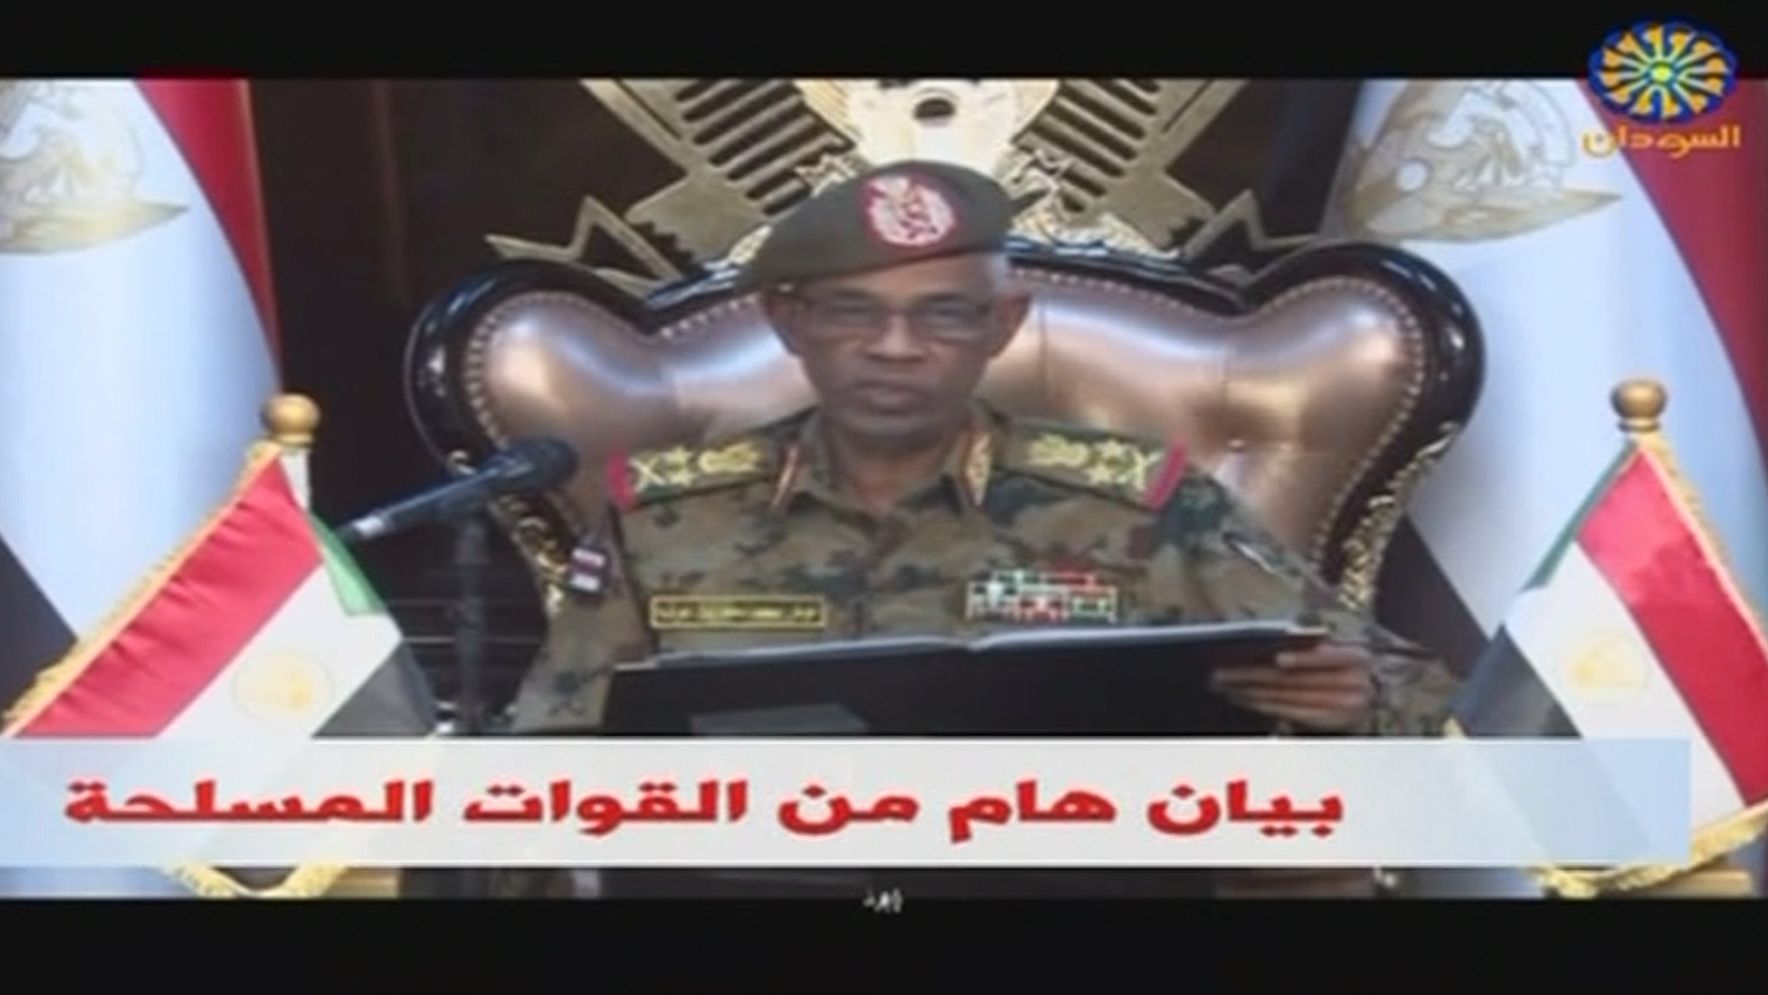 Sudan's defense minister goes on television April 11 to say Bashir's government has been dissolved.